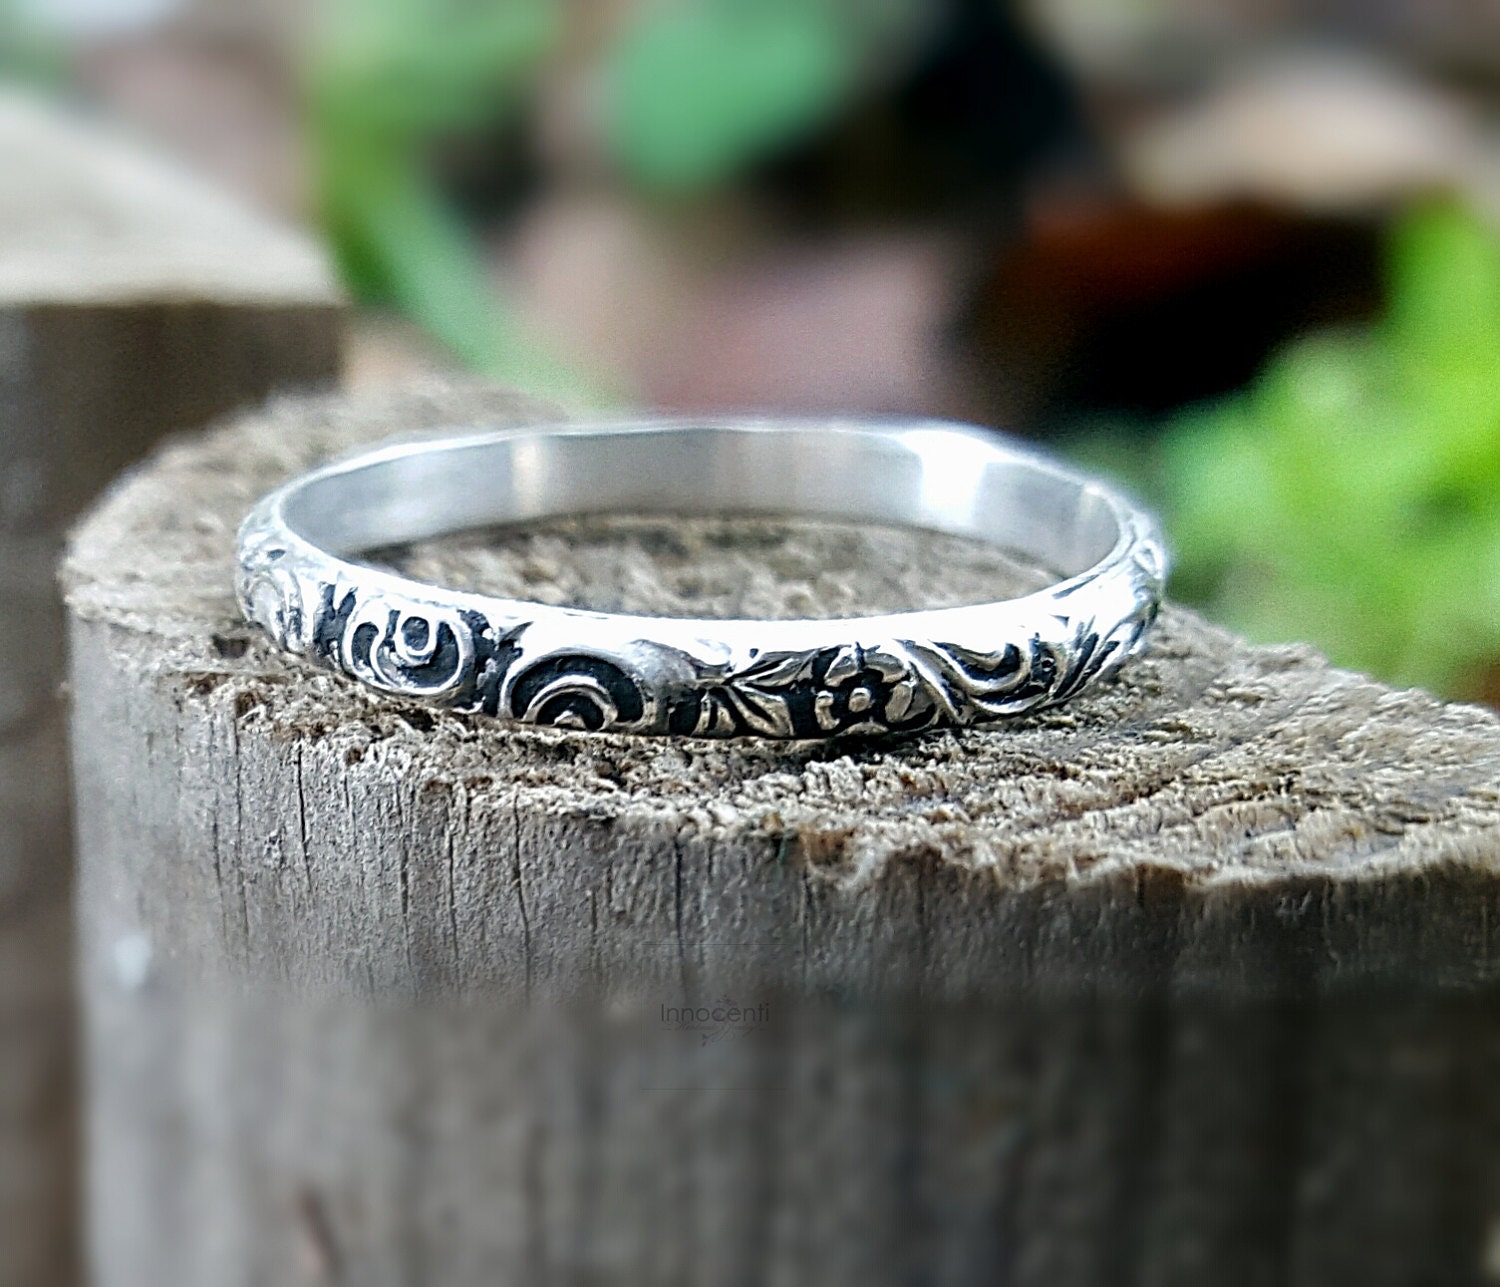 Sterling silver ring,band ring,silver 926 ring,men's ring,minimalist ring,simple  ring,stacking ring,boho ring,silver orbs ring,women's ring